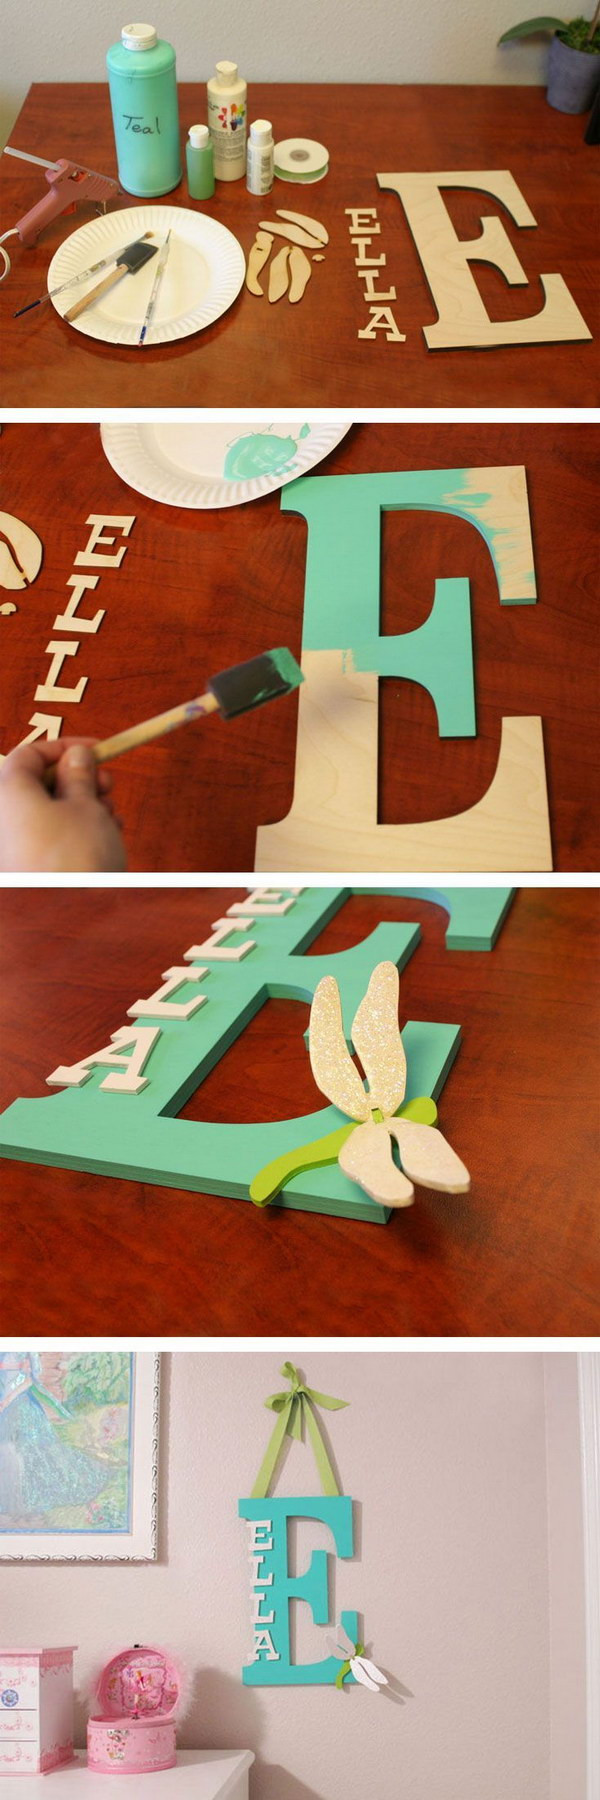 DIY Letters On Wood
 45 Awesome DIY Ideas for Making Your Own Decorative